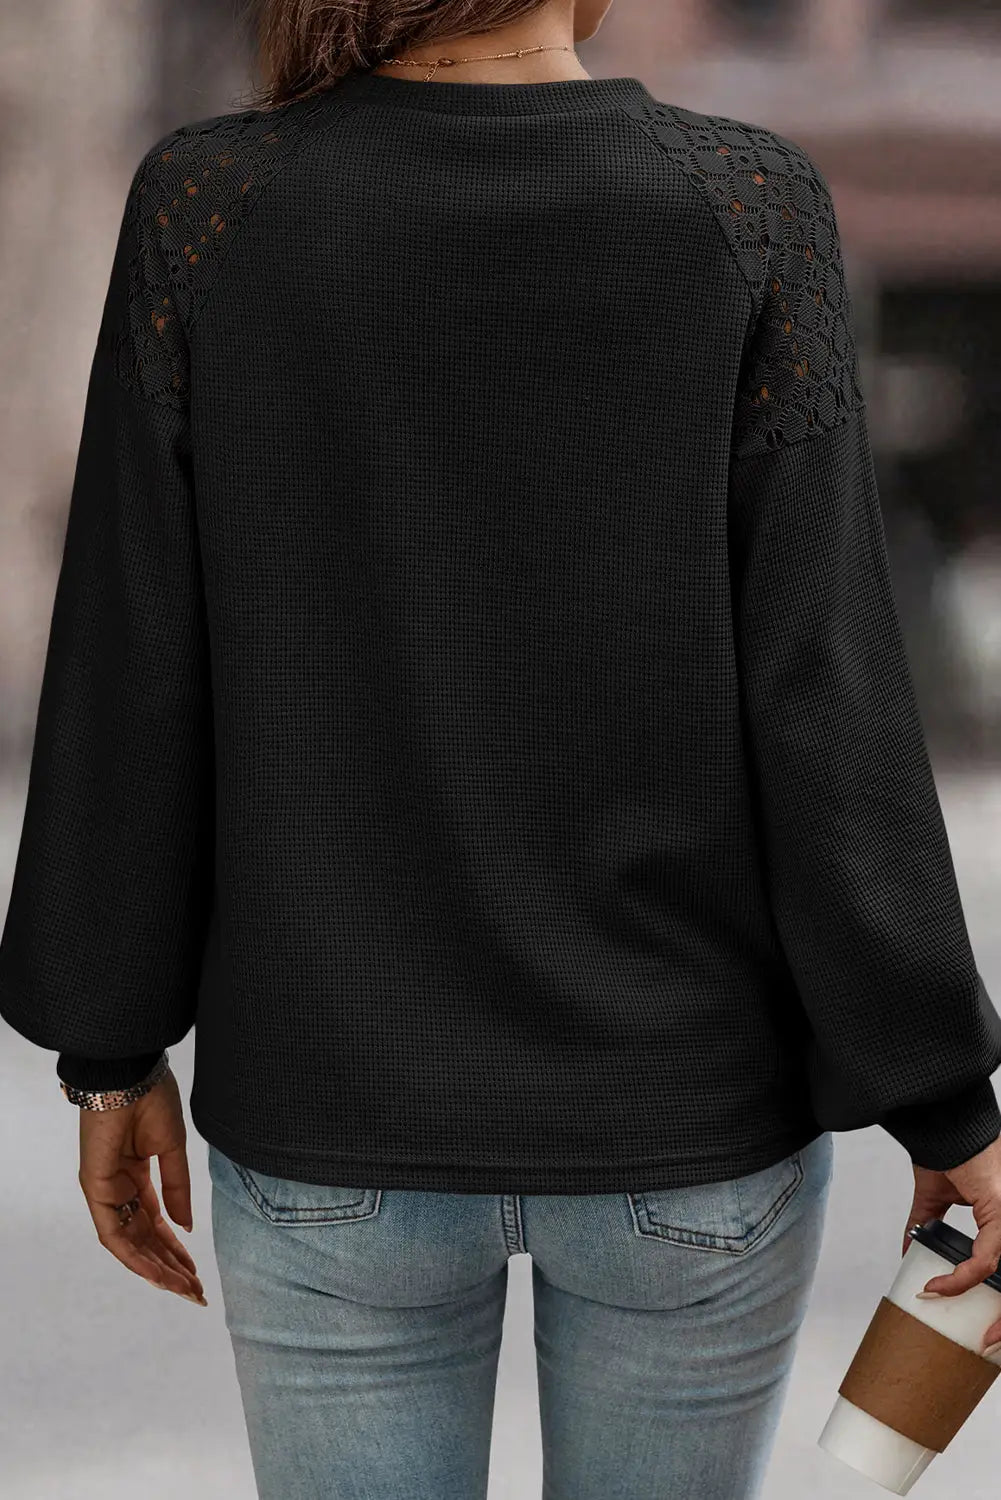 Black lace long sleeve textured pullover - tops